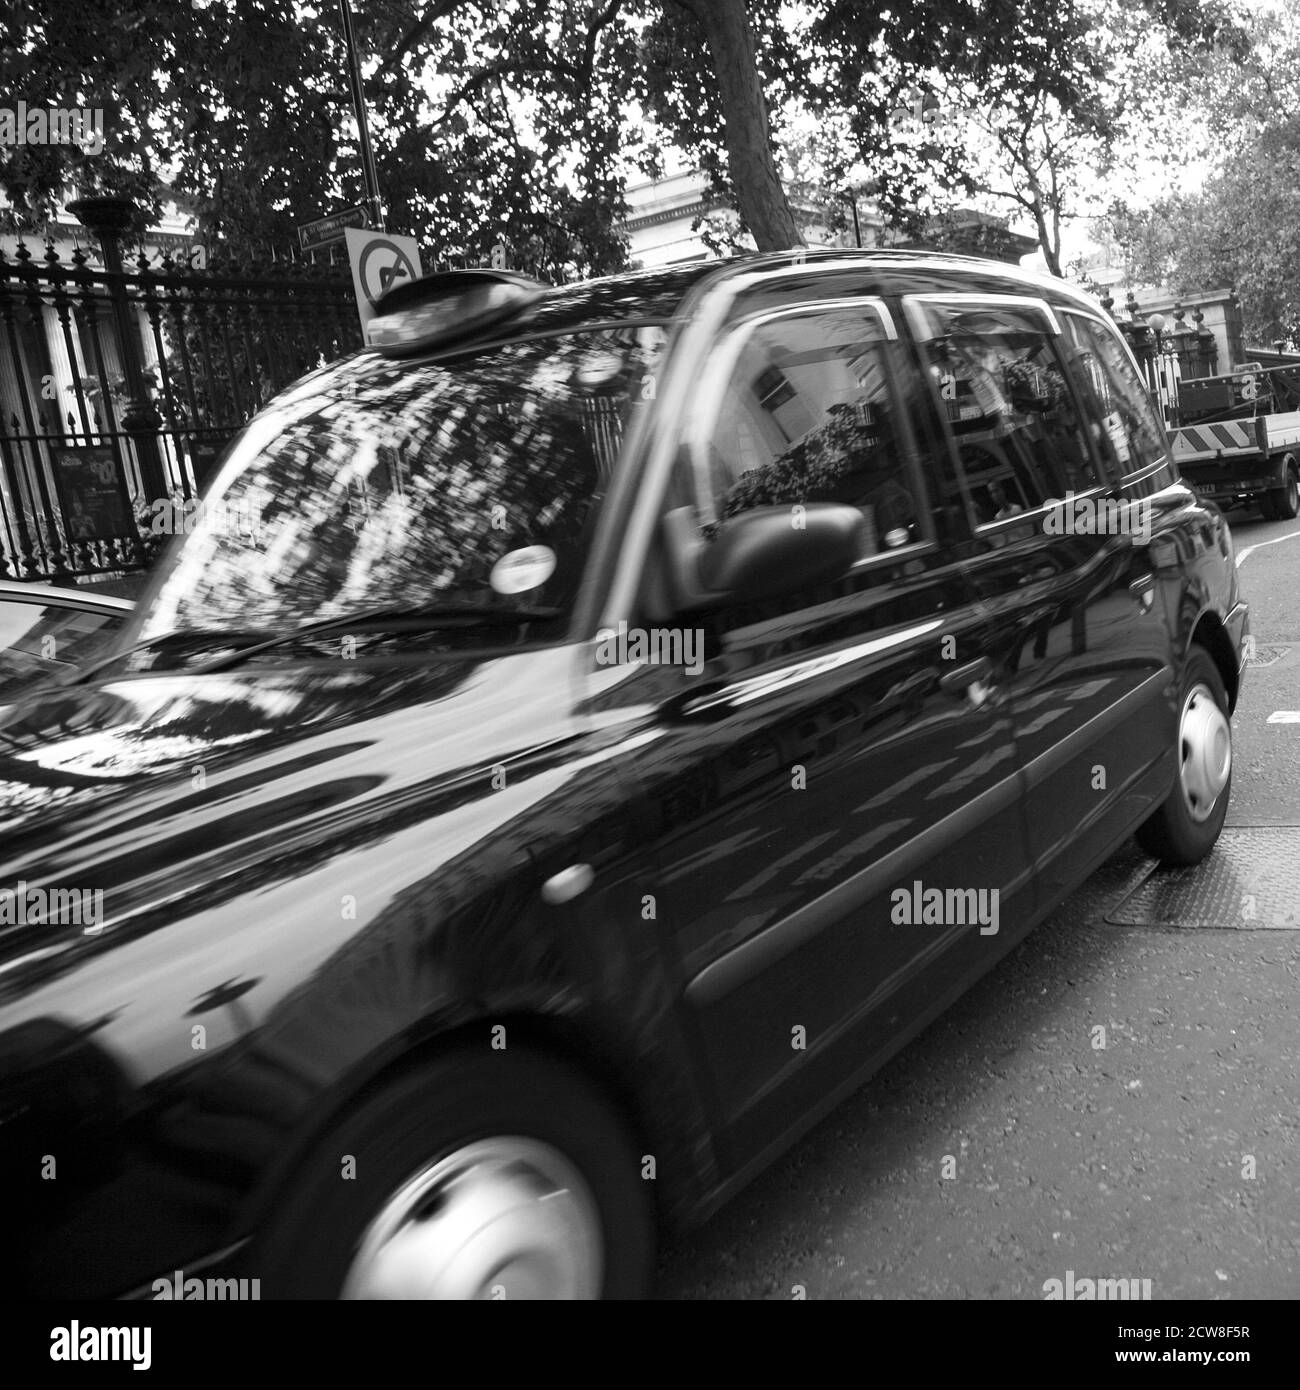 Lonodn, UK - August 13, 2010 : Taxi in the street of London on May 8, 2010 in London, UK. Cabs, Taxis, are the most iconic symbol of London as well as Stock Photo